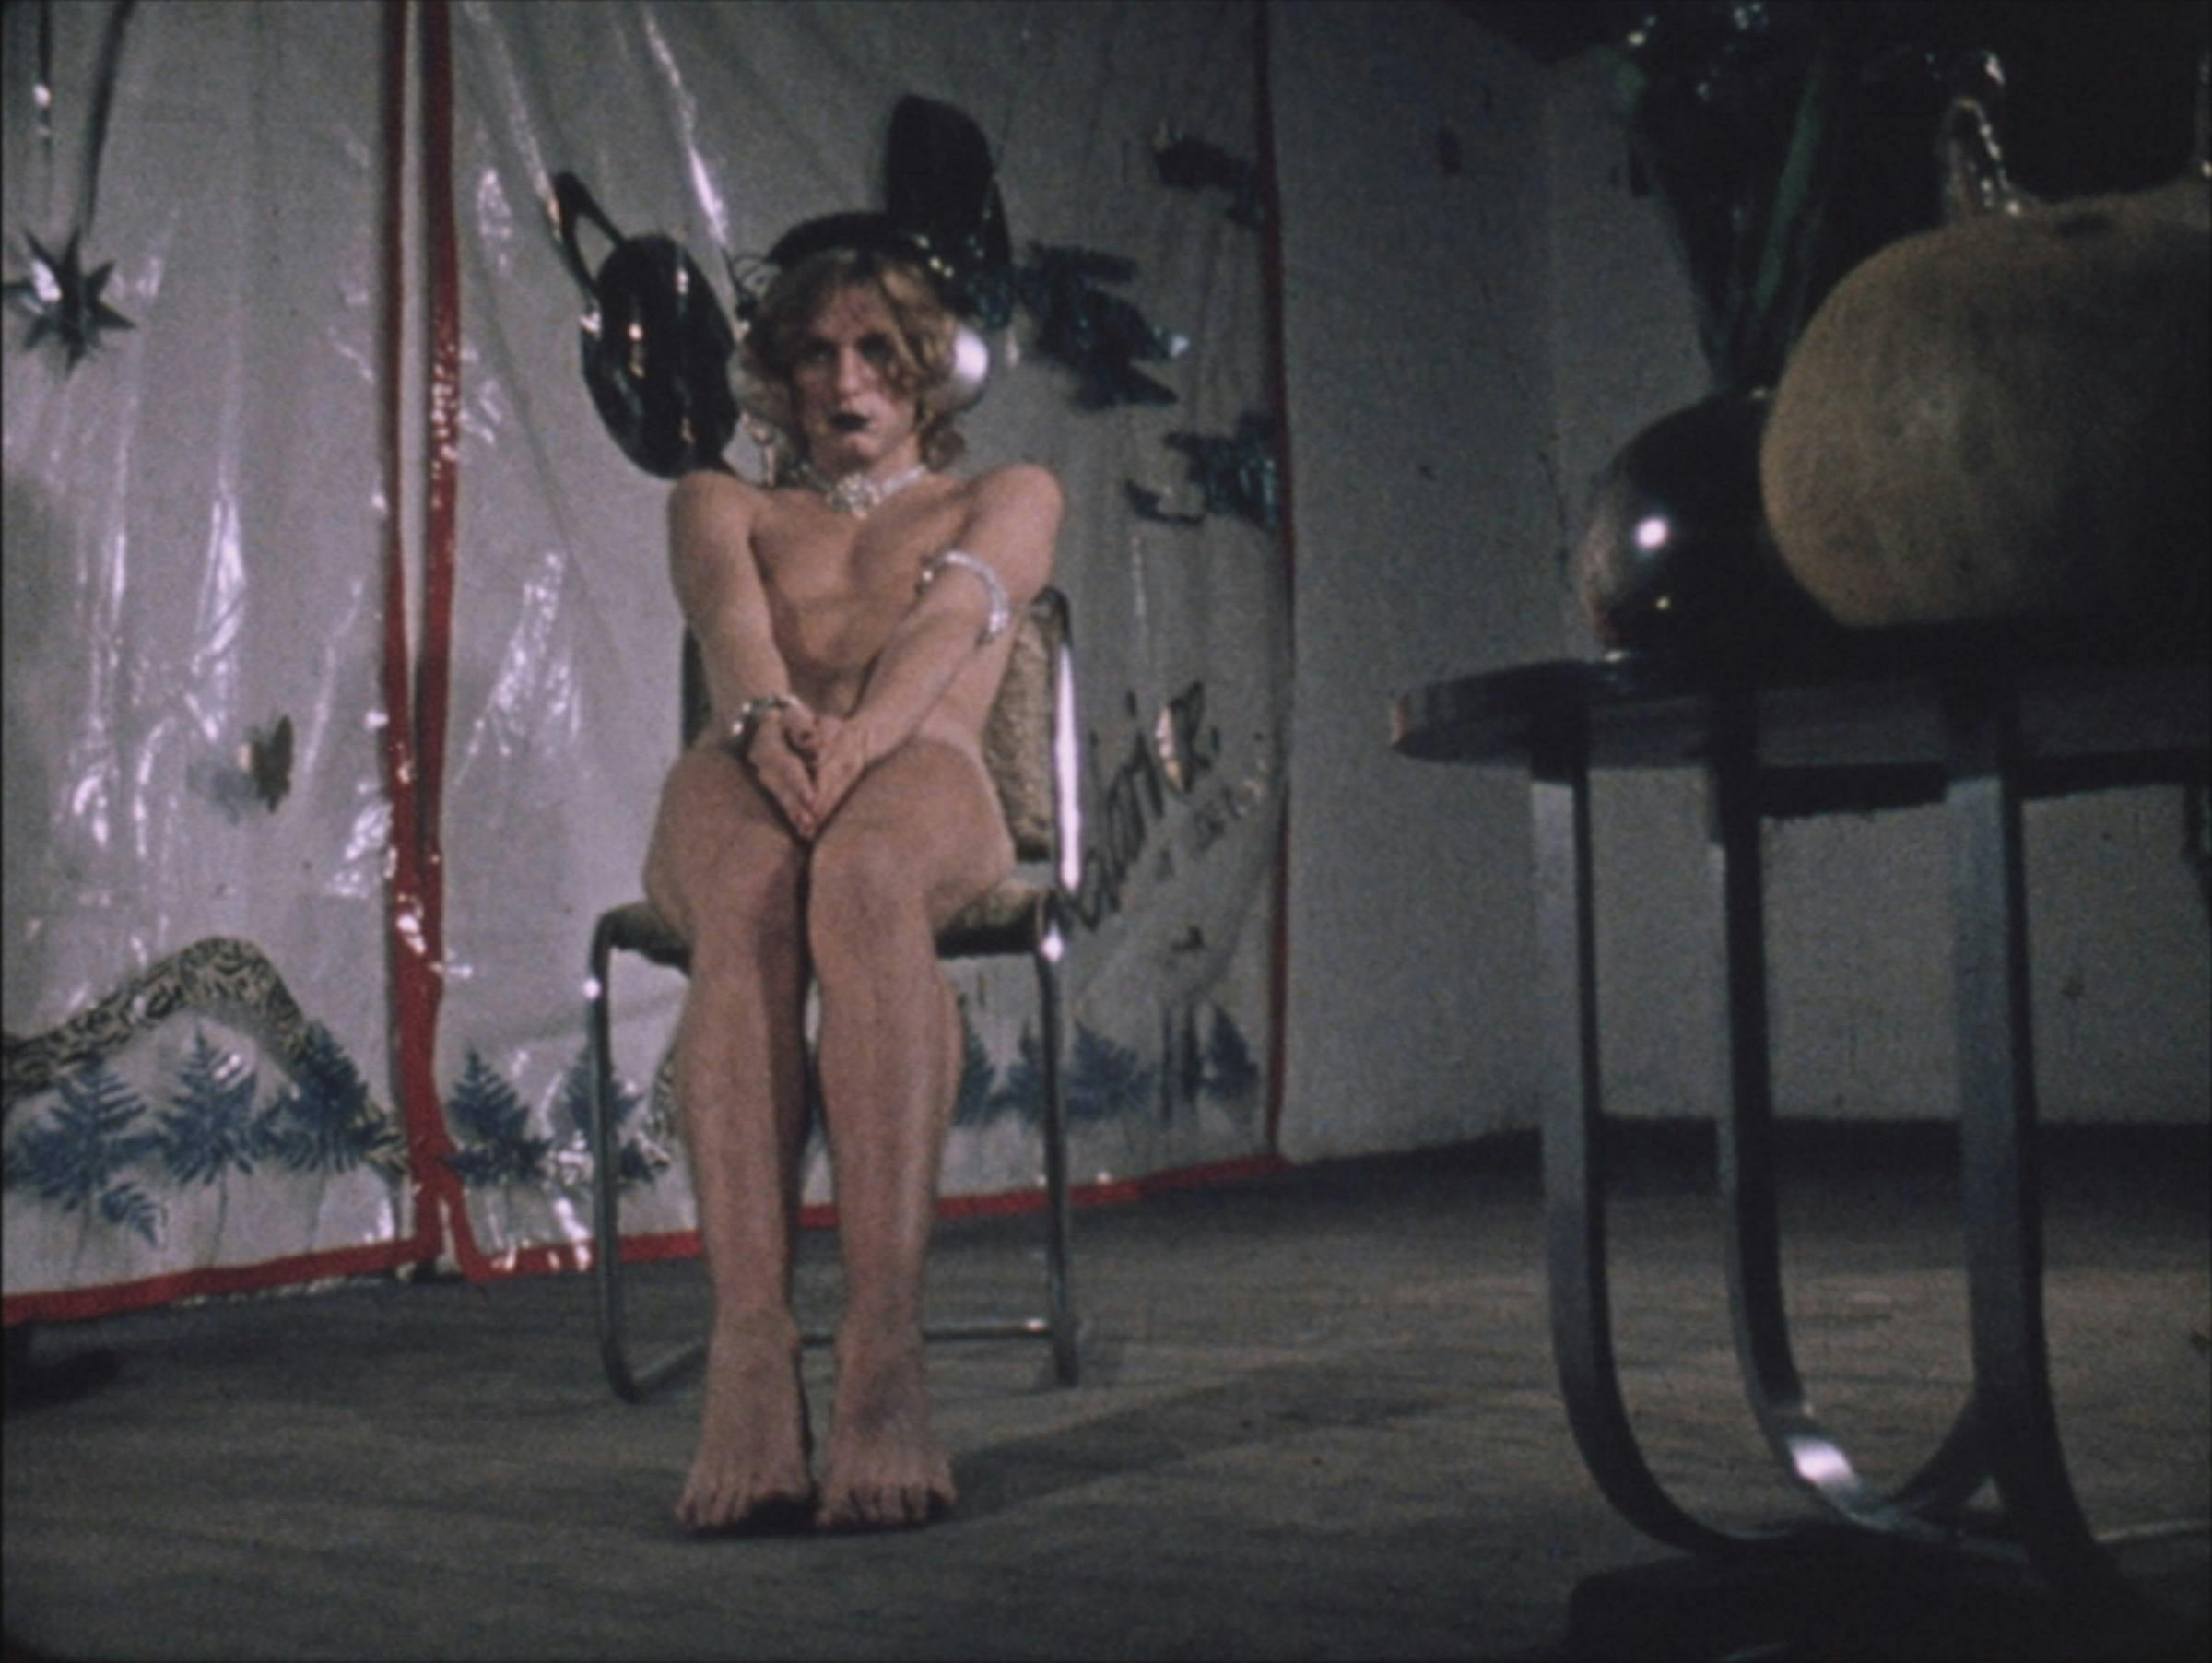 A blond, curly-haired femme person sits naked on a chair. They are sat in a room with a table in the foreground with a vase sat on top of it.